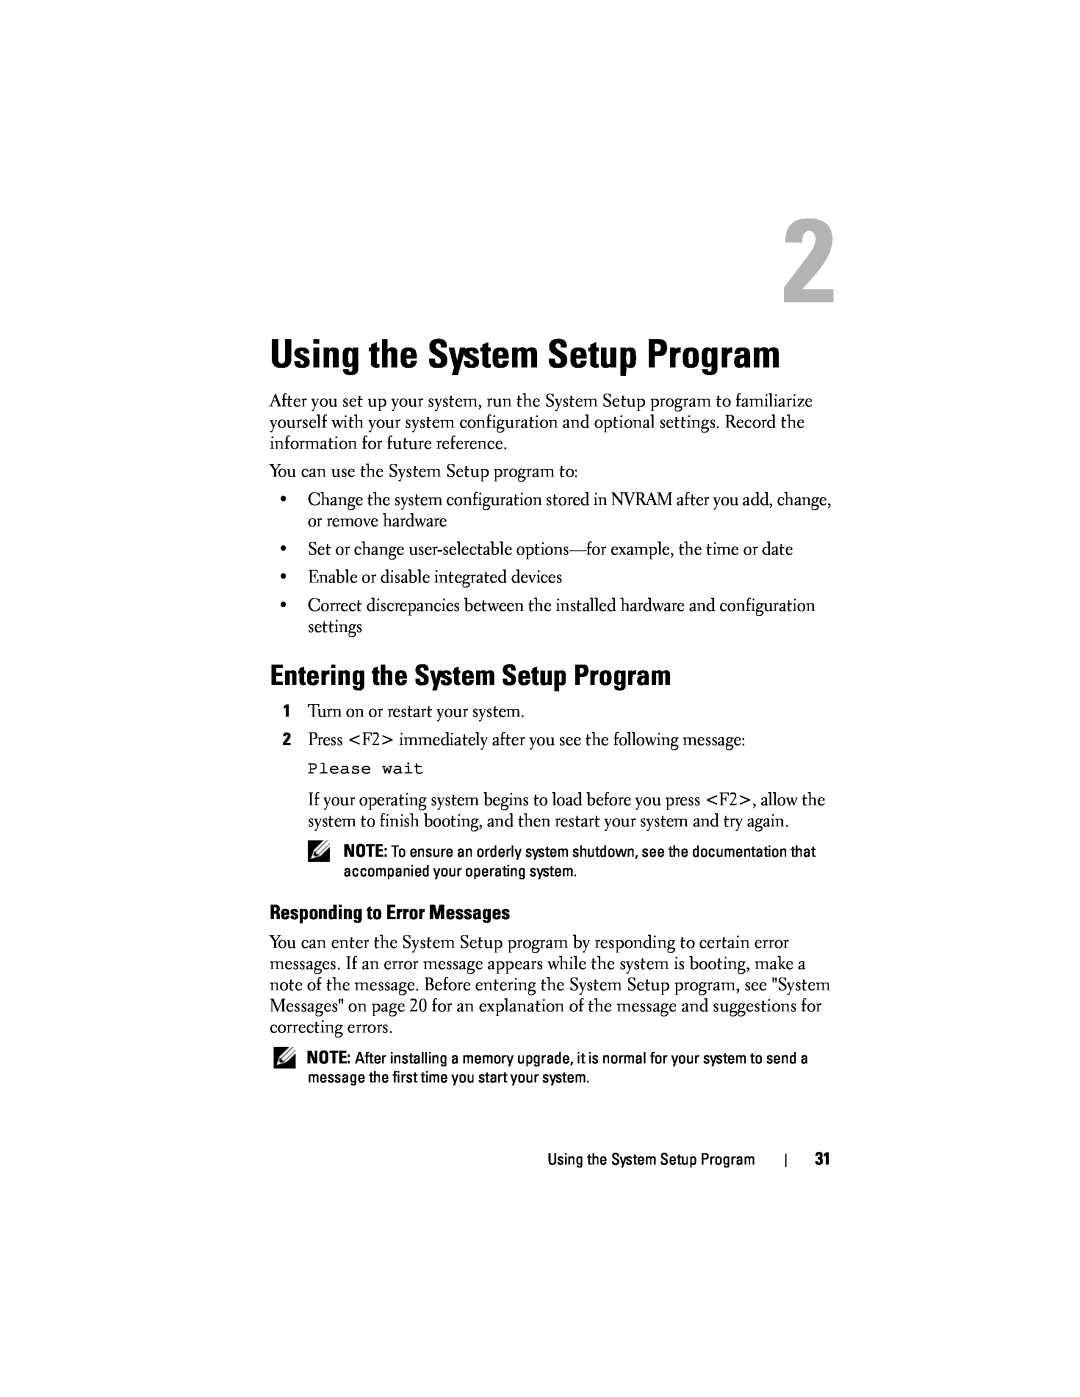 Dell T105 owner manual Using the System Setup Program, Entering the System Setup Program, Responding to Error Messages 